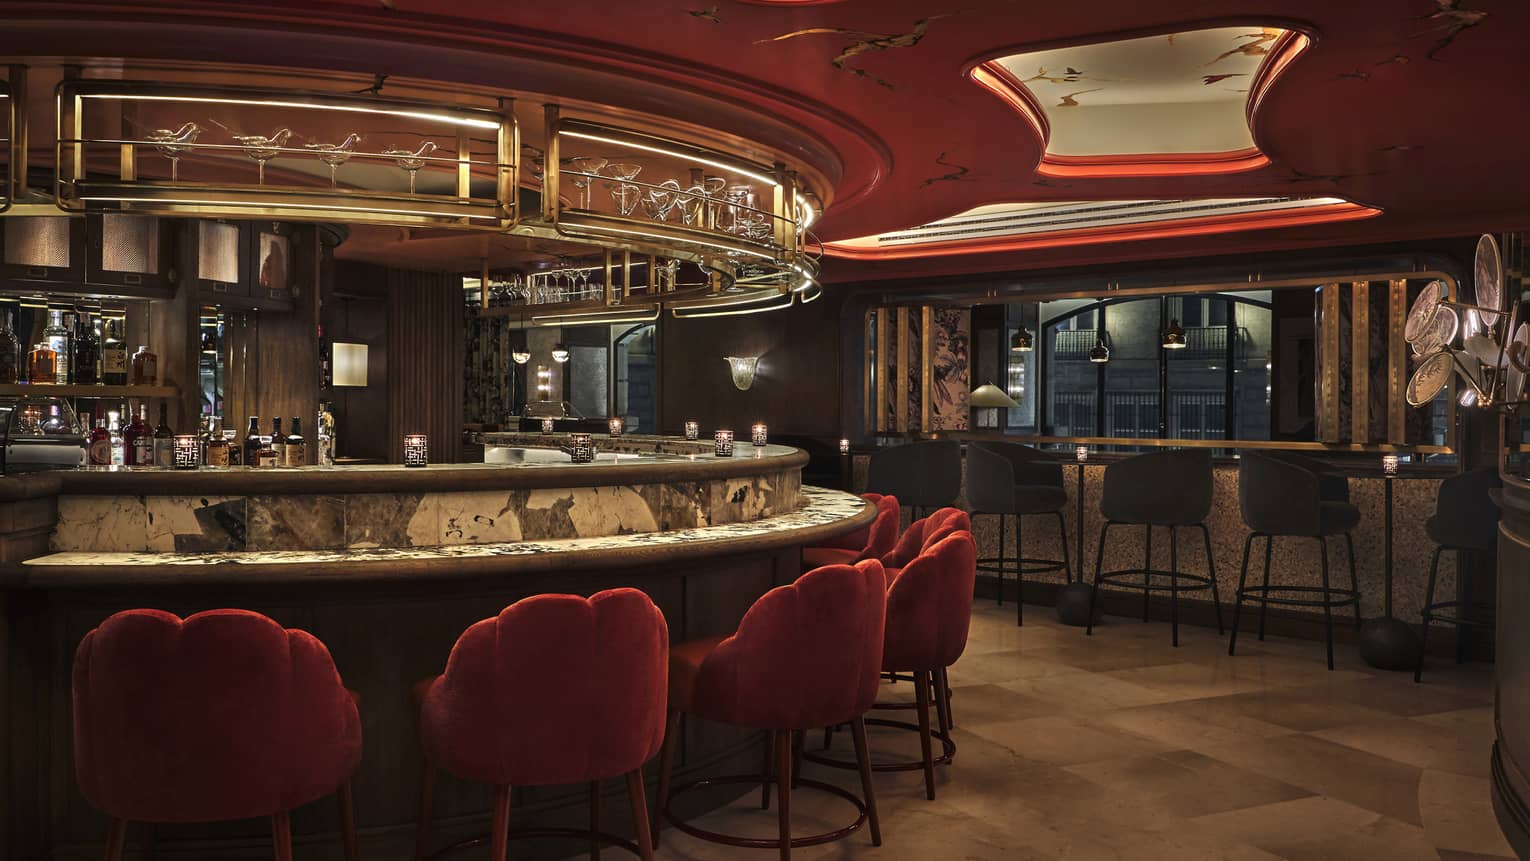 Moody bar and lounge with red upholstered chairs, curved bar, red-lit ceiling features